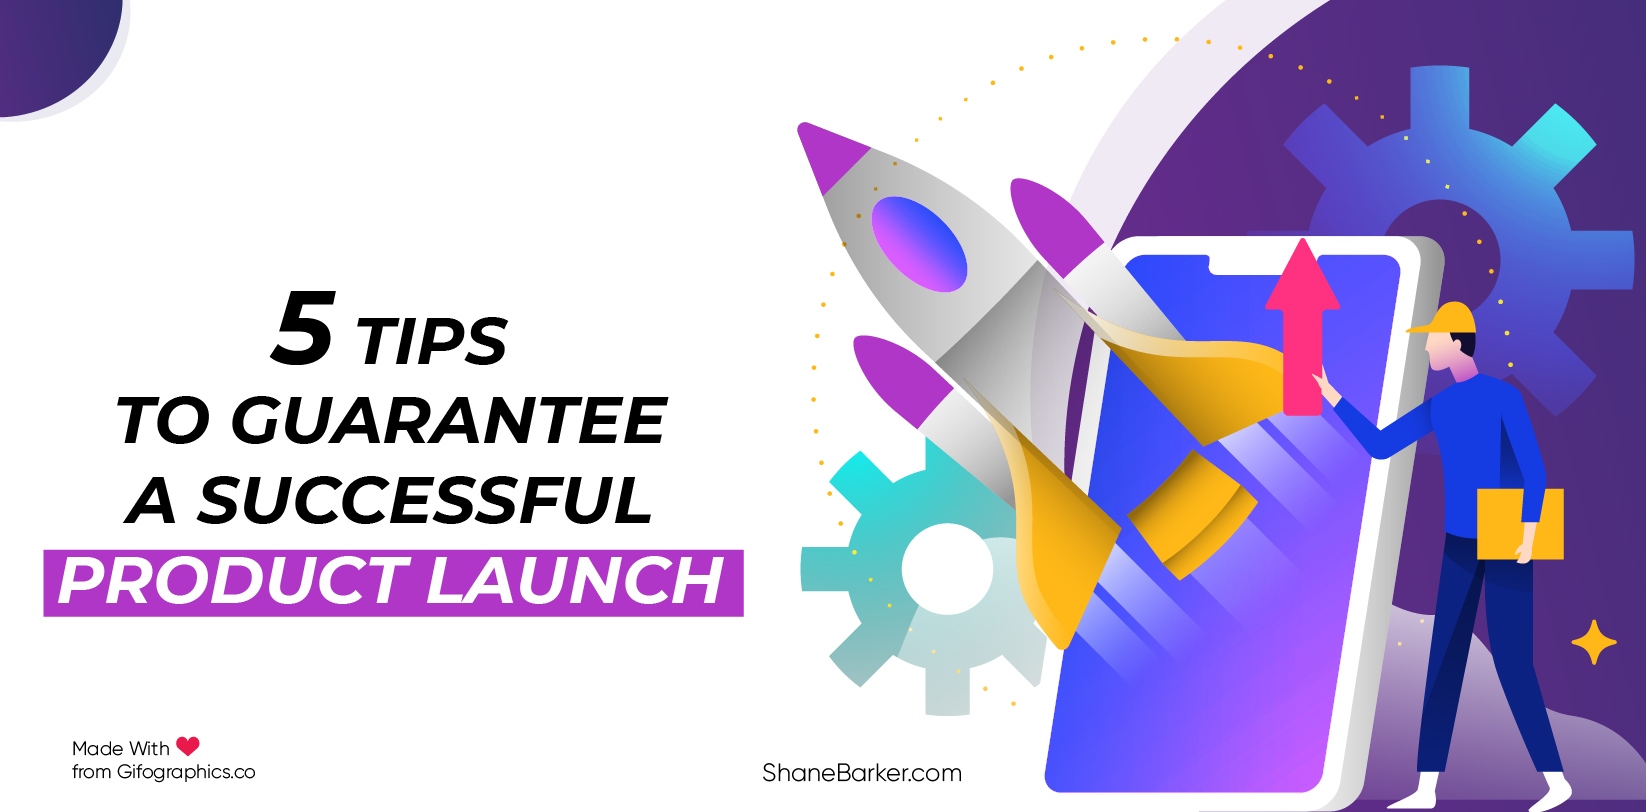 5 tips to guarantee a successful product launch (updated december 2019)